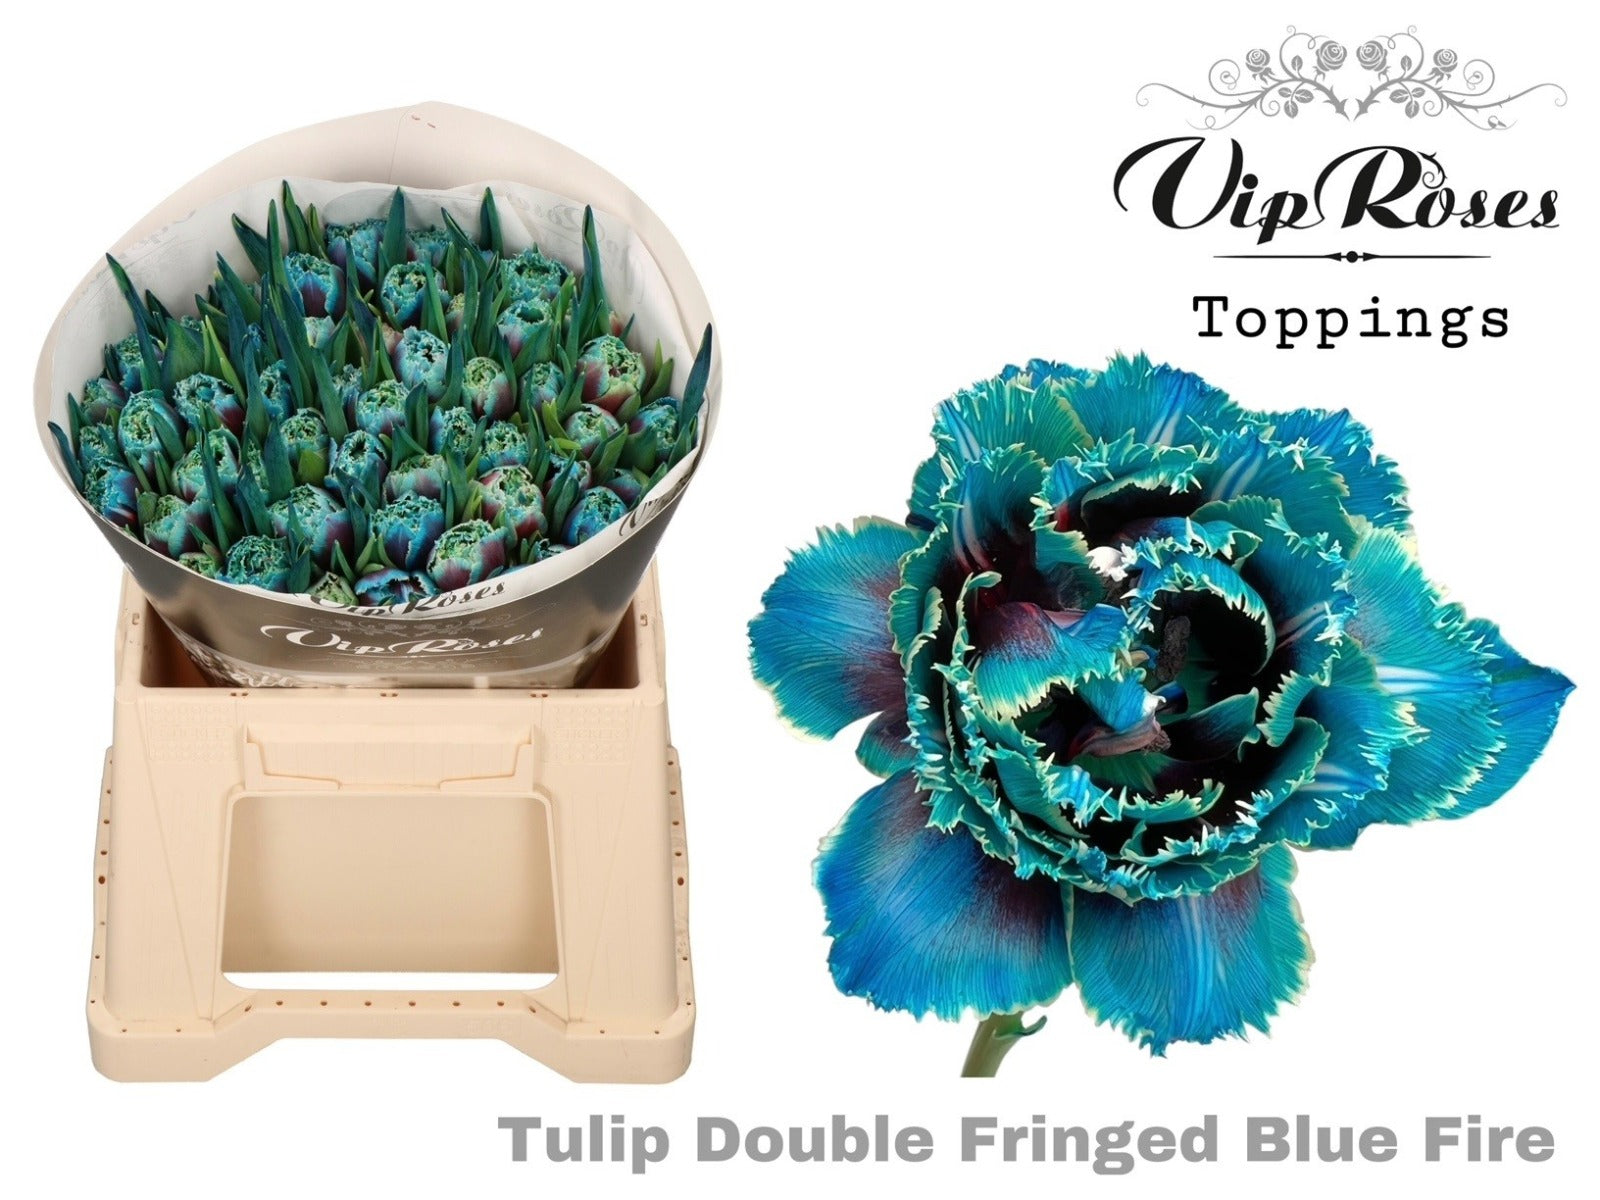 Tulpe "Double Fringed Blue Fire"